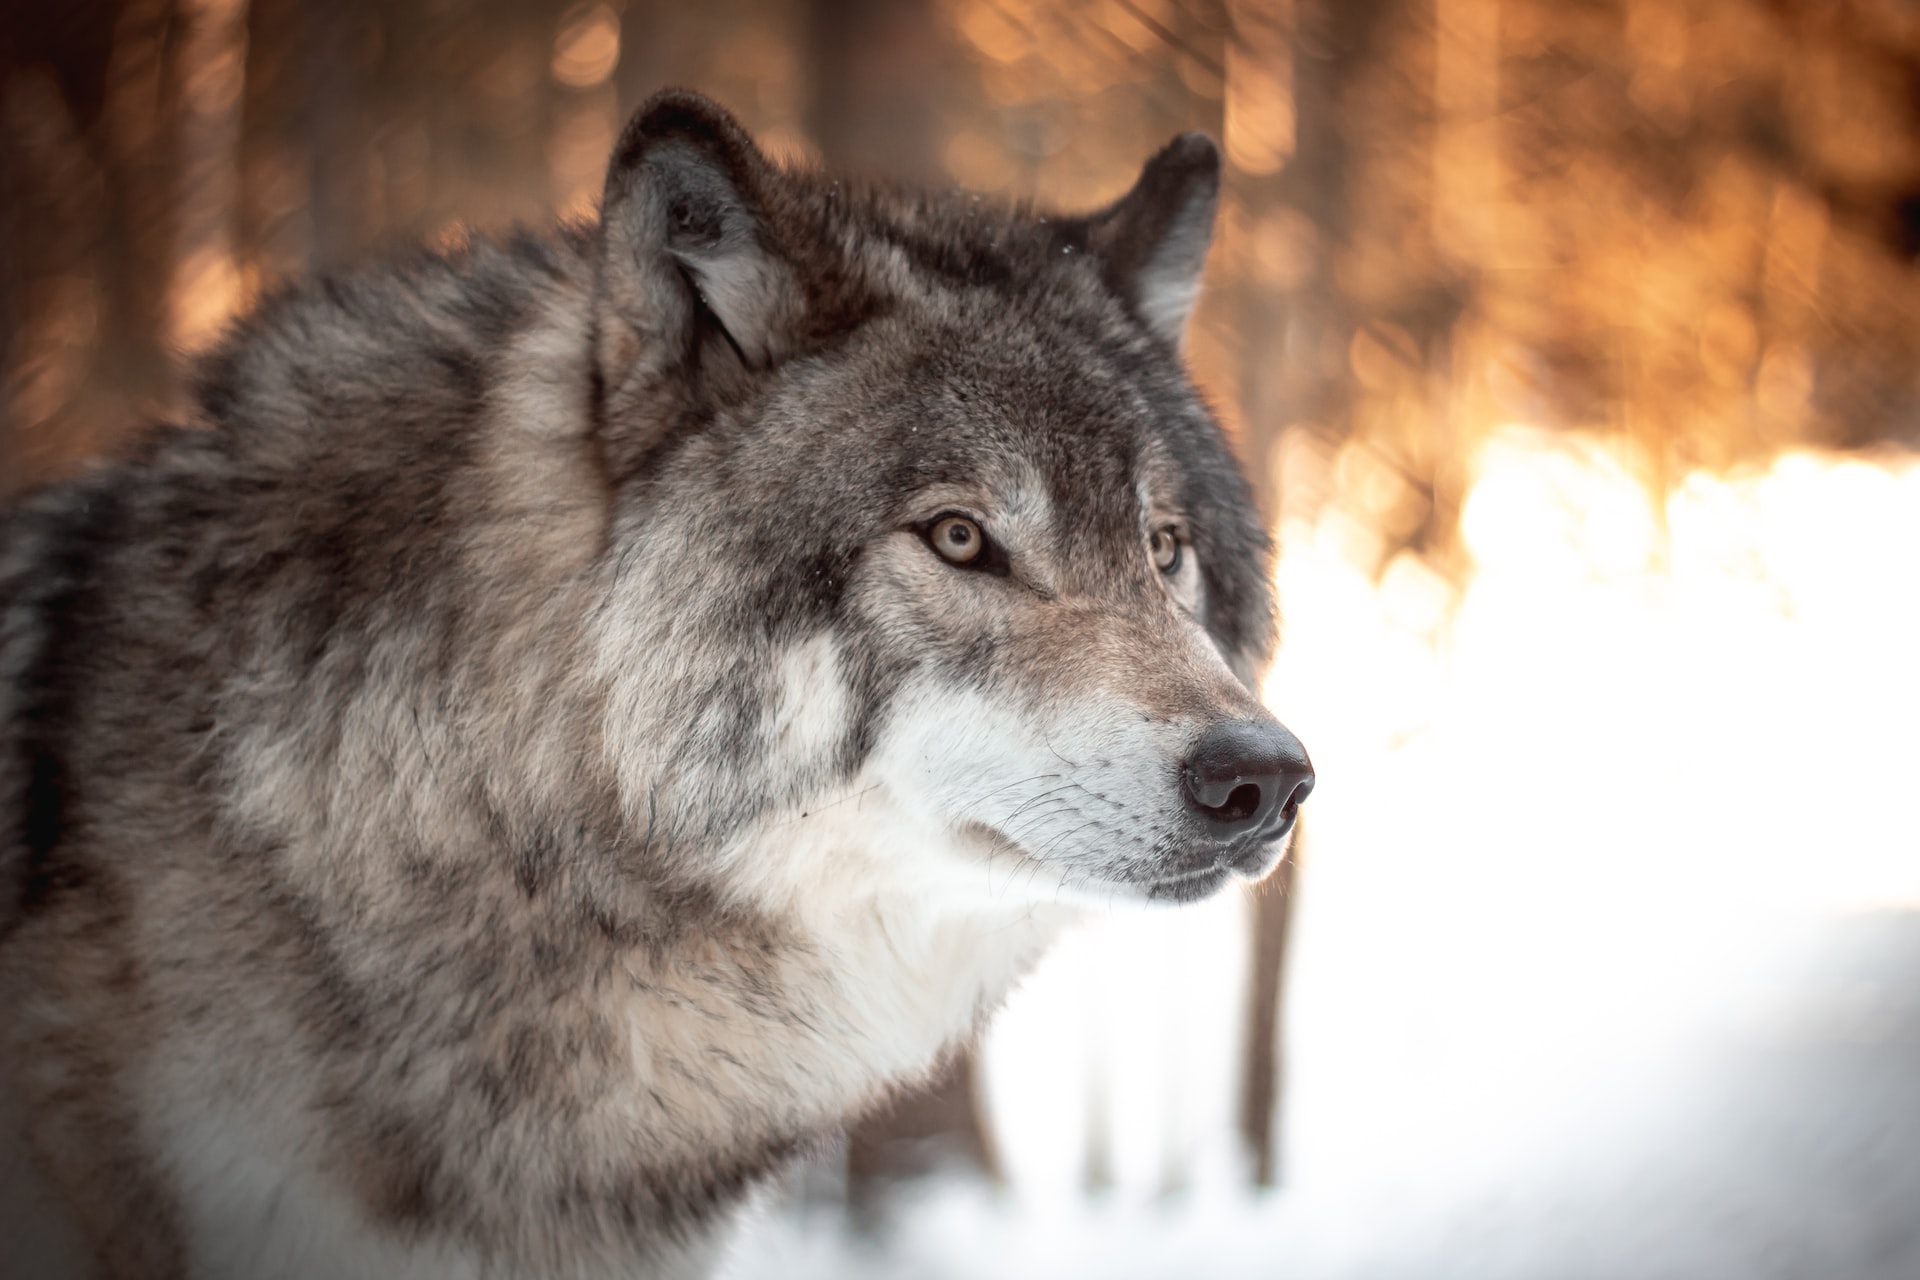 Wolf-tastic: The Fascinating World of the Large and Carnivorous Mammal